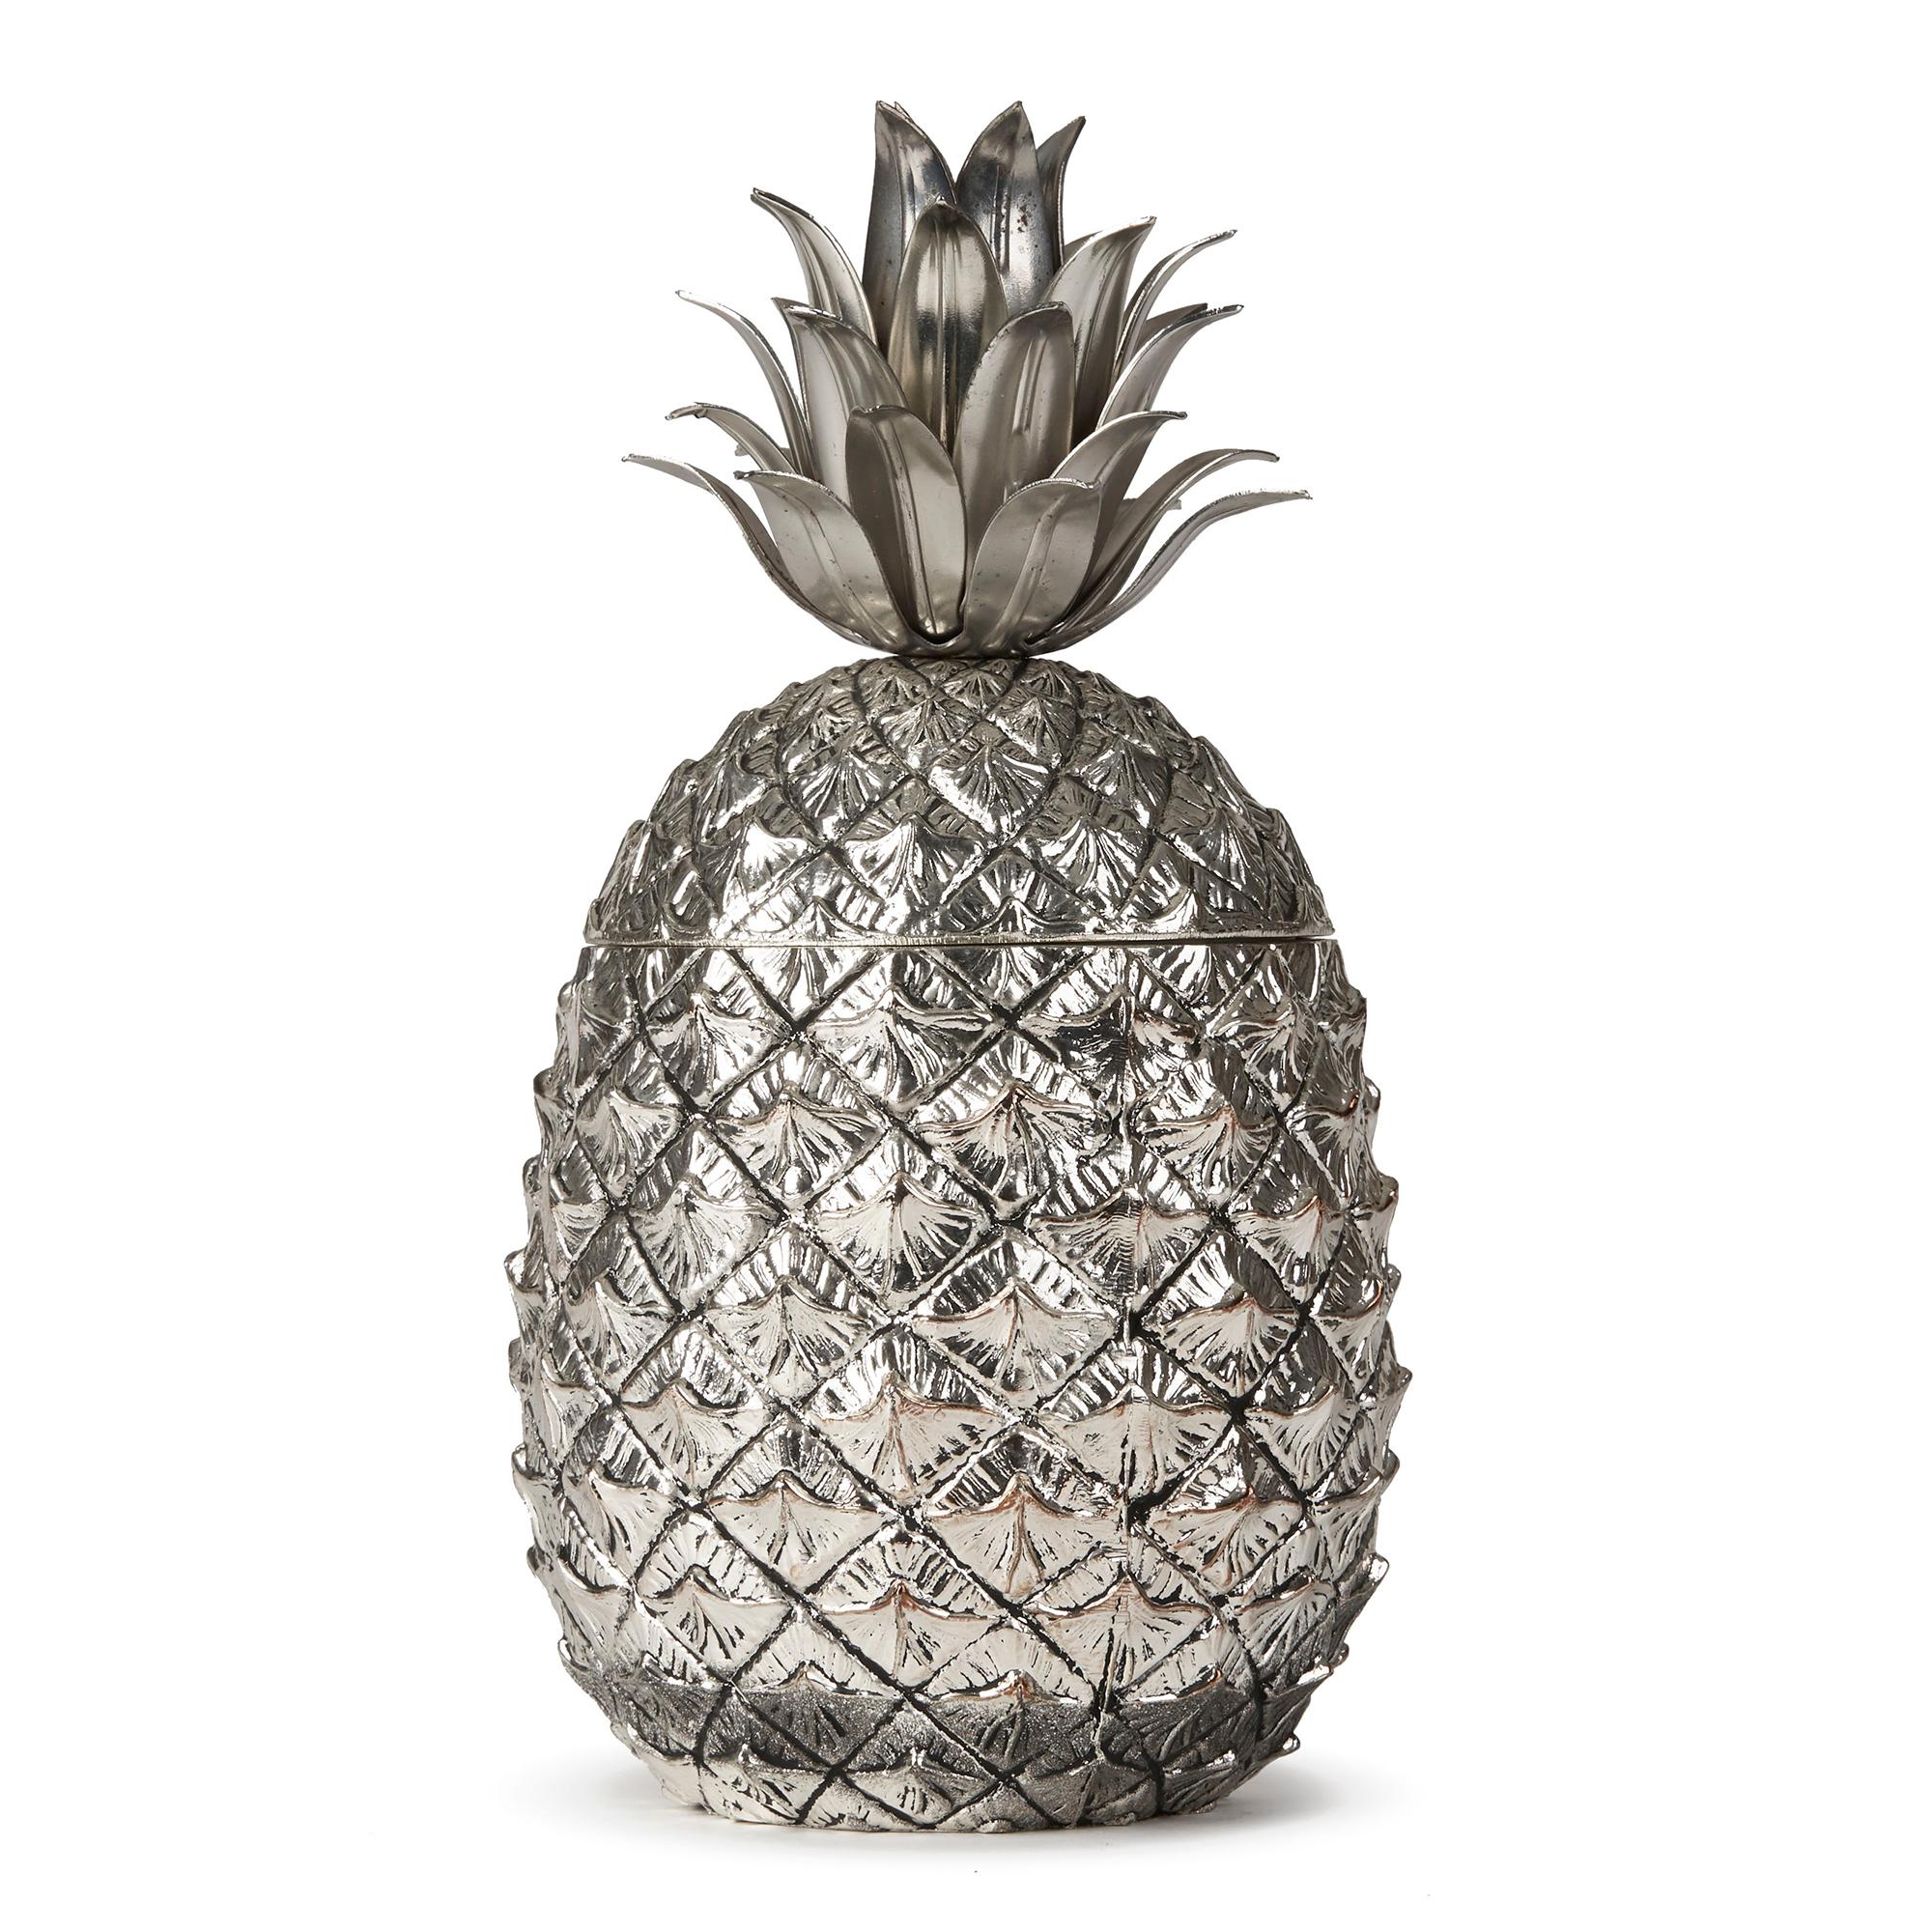 A stylish Italian Pineapple ice bucket clad in a naturalistic silvered metal finish by renowned designer Mauro Manetti or Fonderia d'Arte in Firenze, Italy. The ice bucket has a fitted removable top with an internal plastic liner and has molded